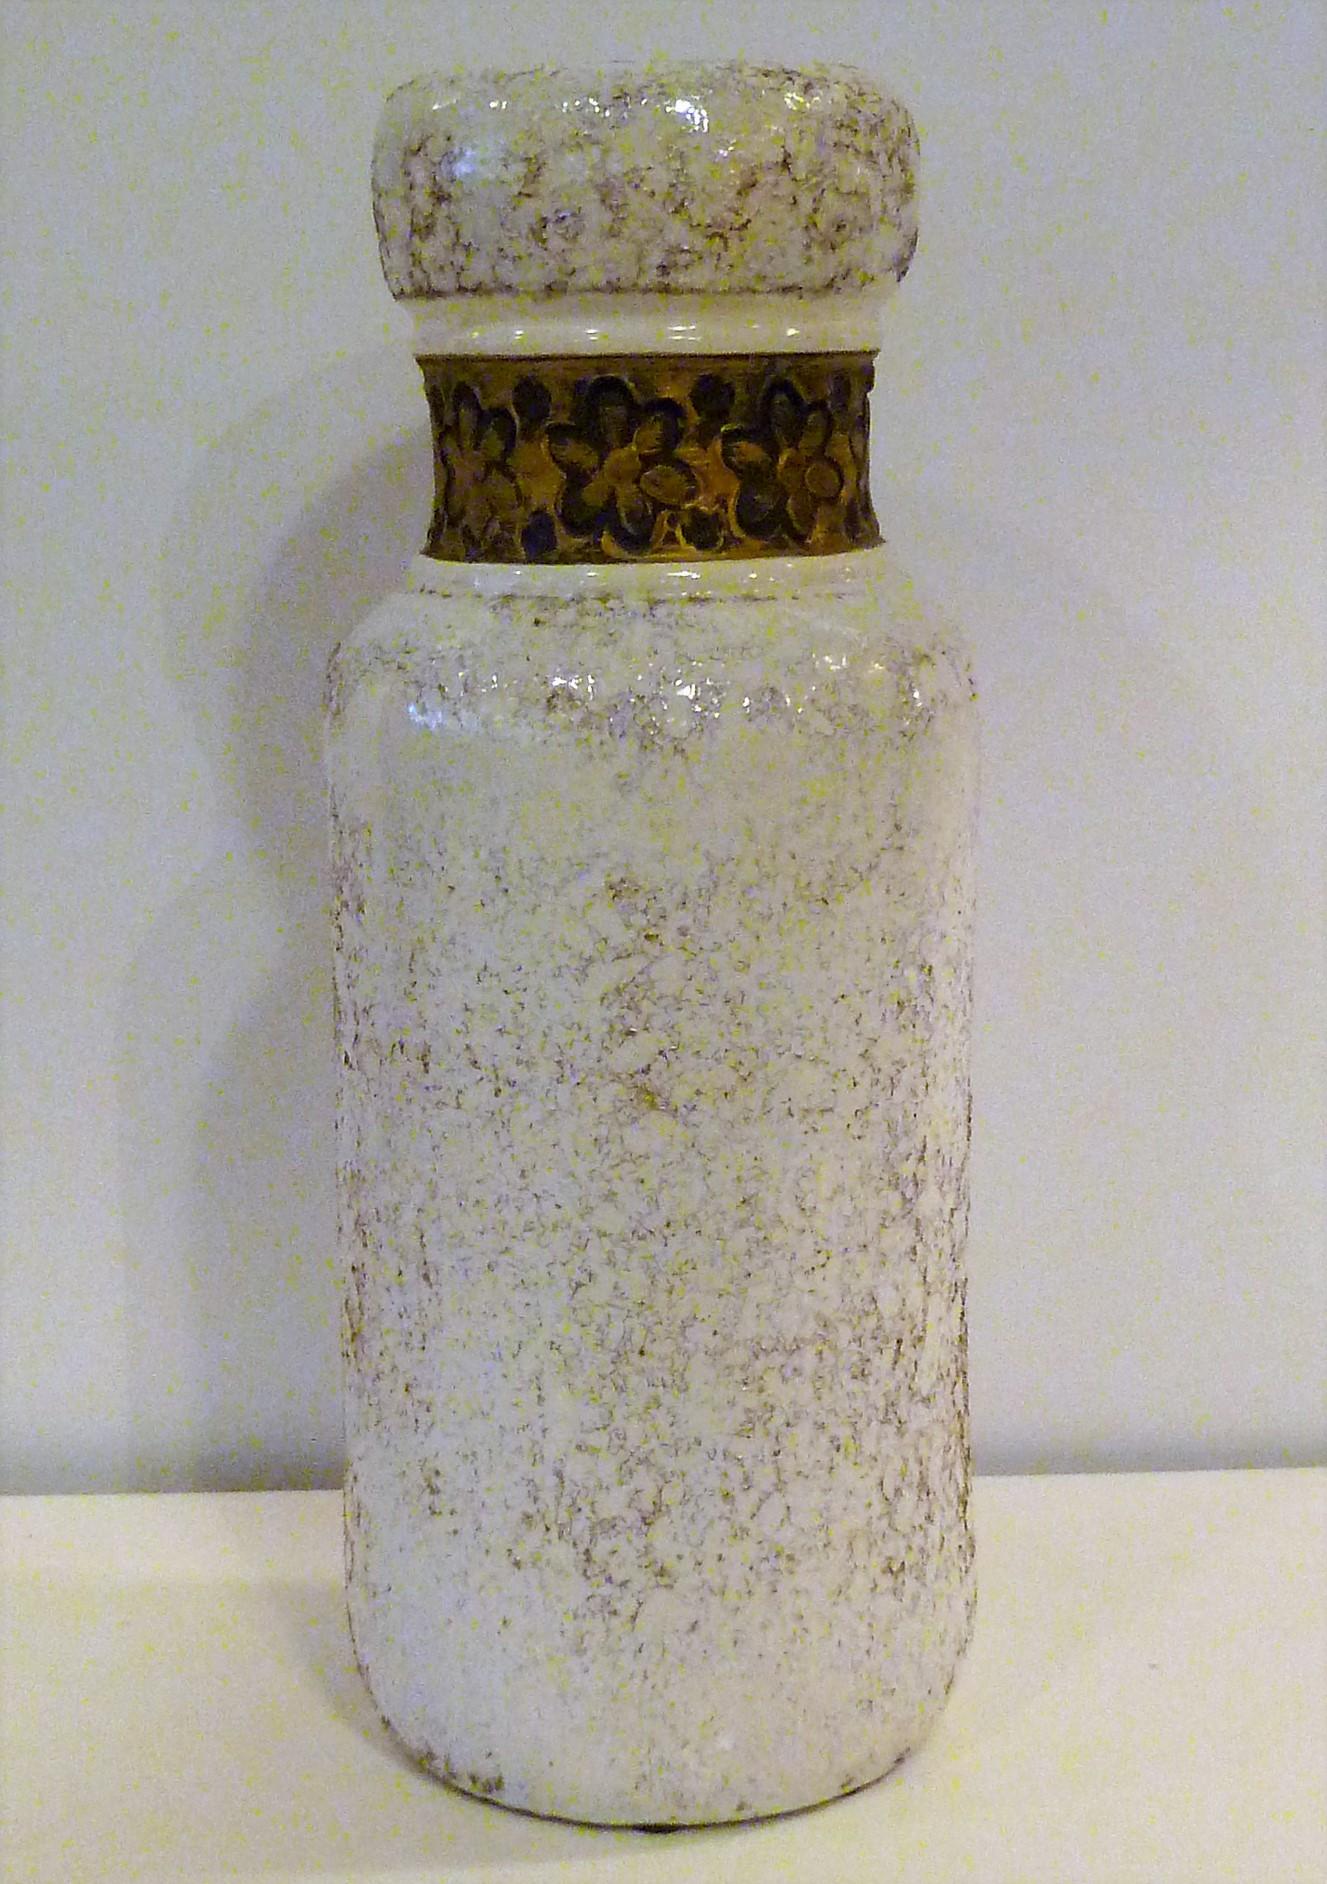 Aldo Londi for Rosenthal Netter made by Bitossi. An elegant Italian Modern textured pottery vase, 1960s. A thick white lava glaze has been applied over the terracotta body to created a rough texture embellished with a neck band of gold gilt flowers.